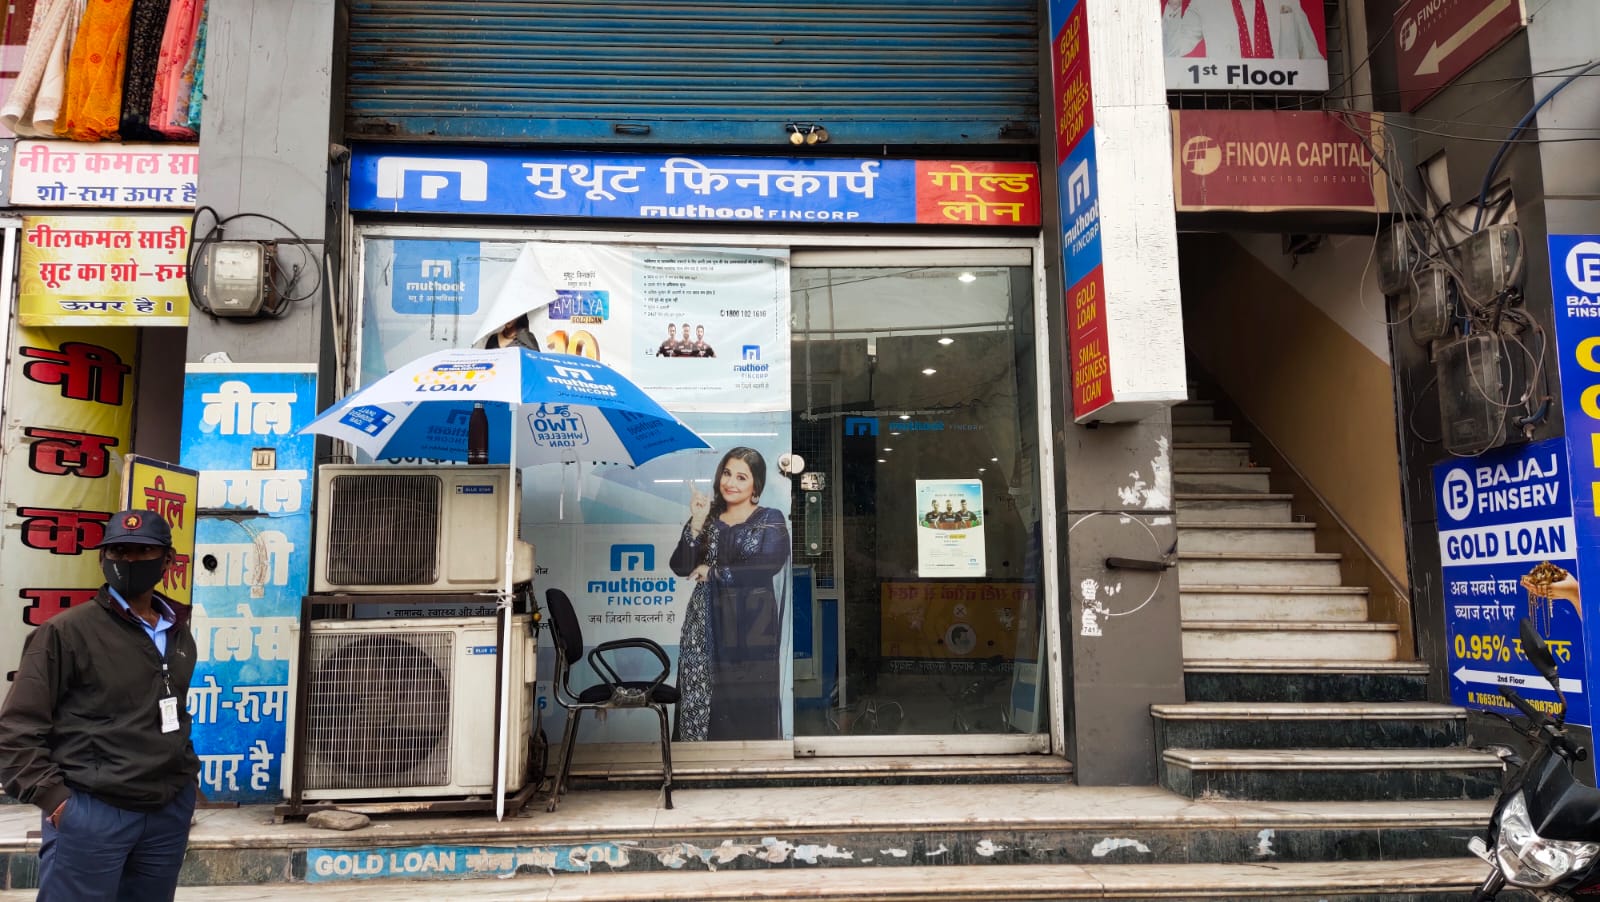 Photos and Videos of Muthoot Fincorp Gold Loan in Beawar Road, Ajmer